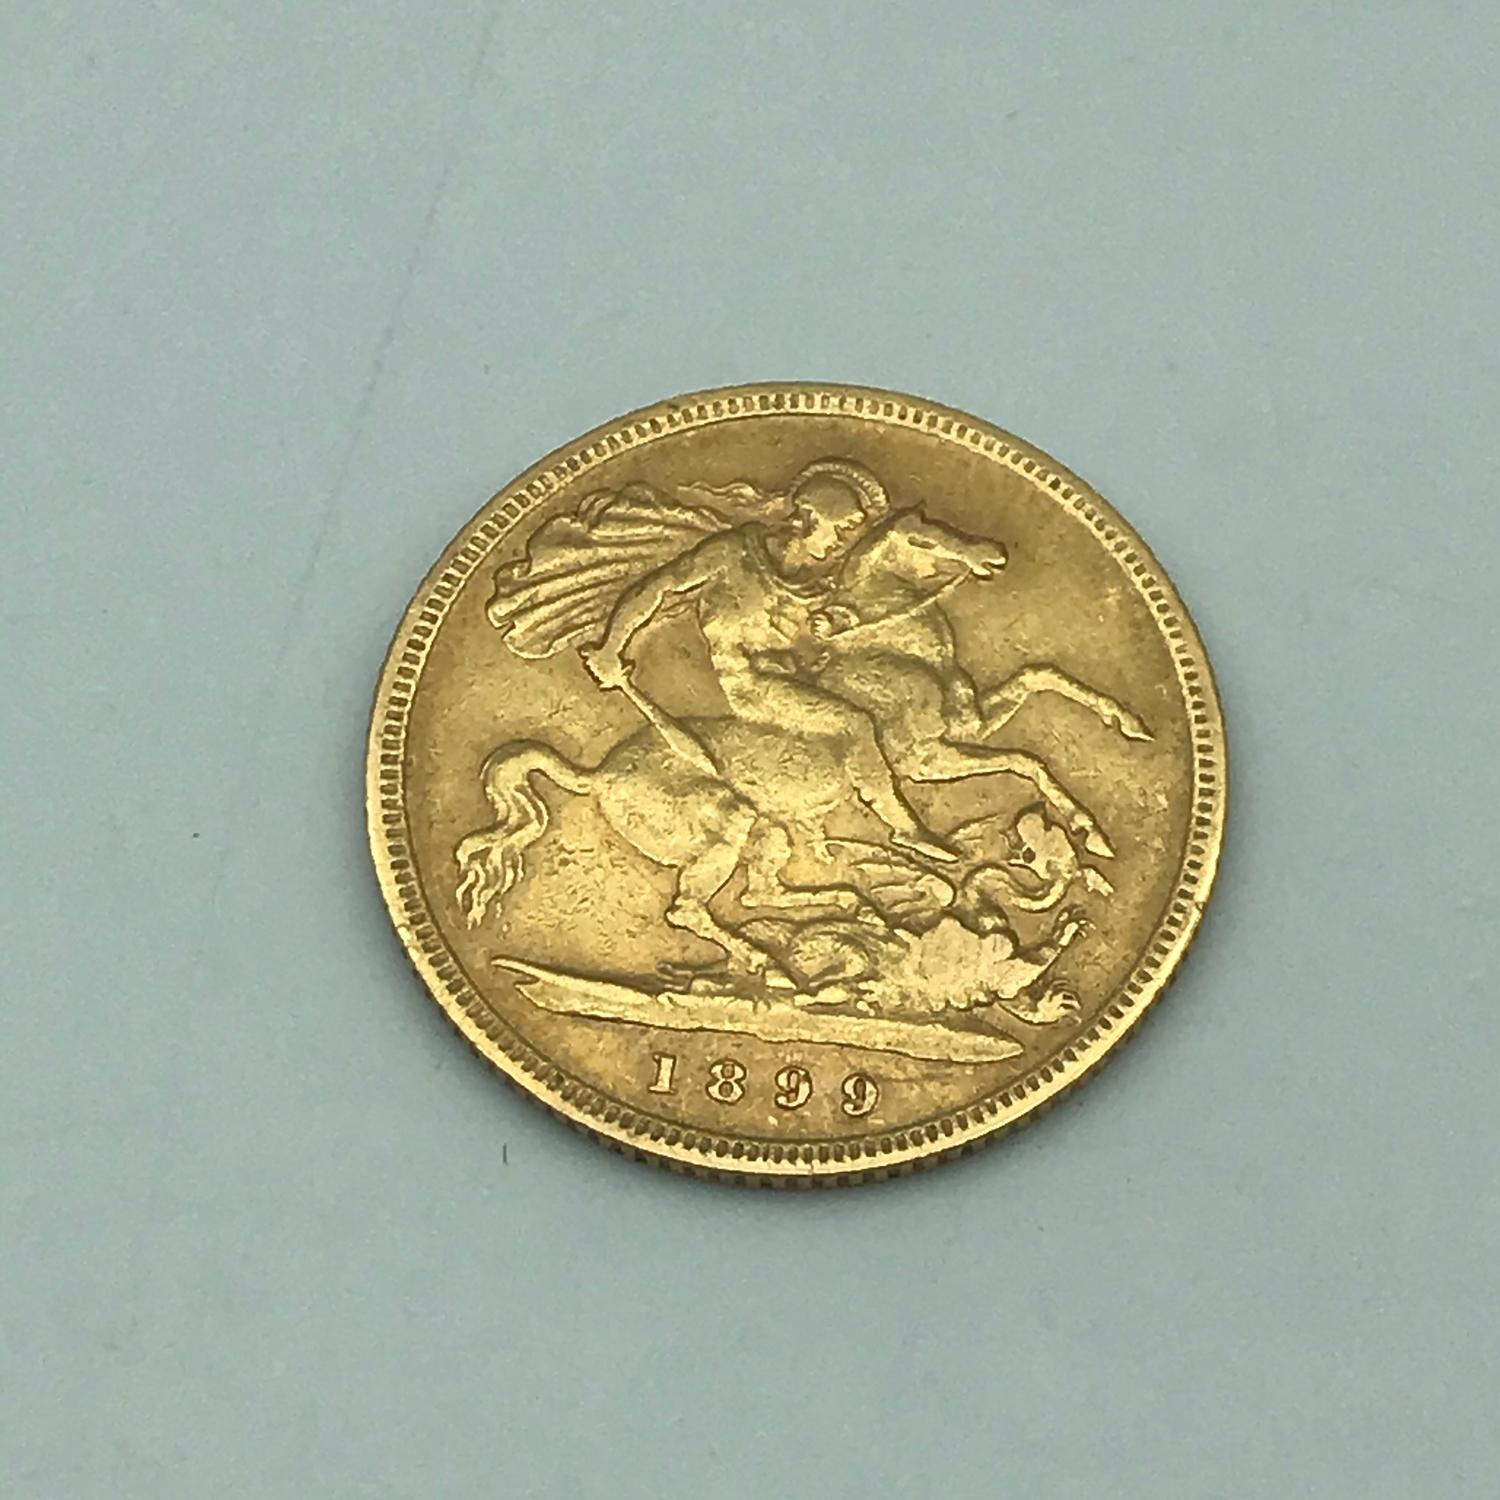 1899 gold half sovereign showing old Queen Victoria head. - Image 2 of 2